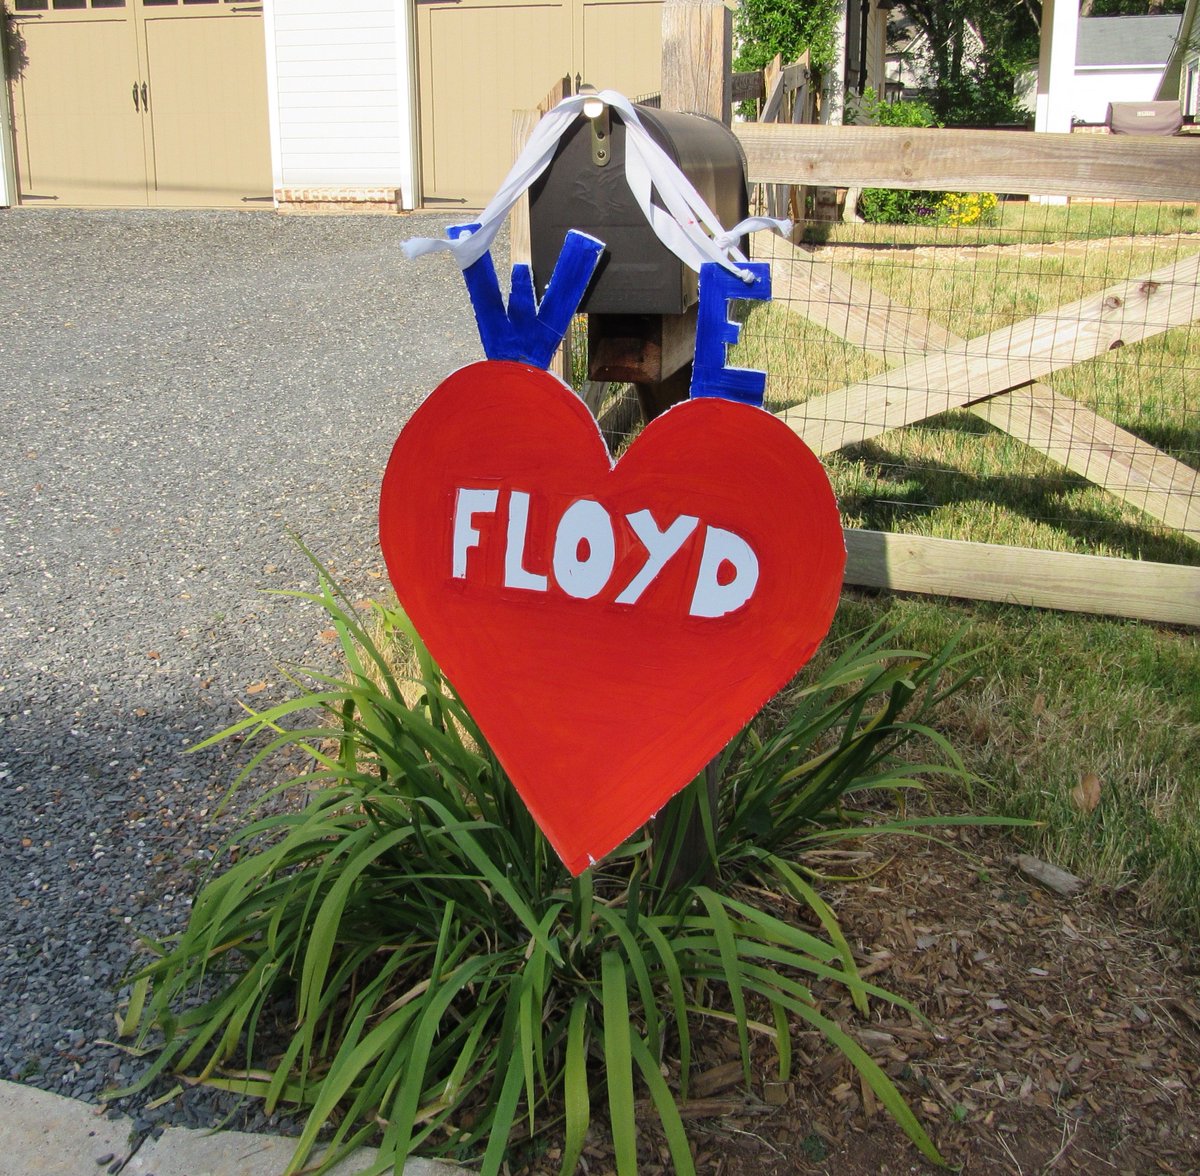 Update! People on Floyd's route decorated their mailboxes to surprise him on his last day